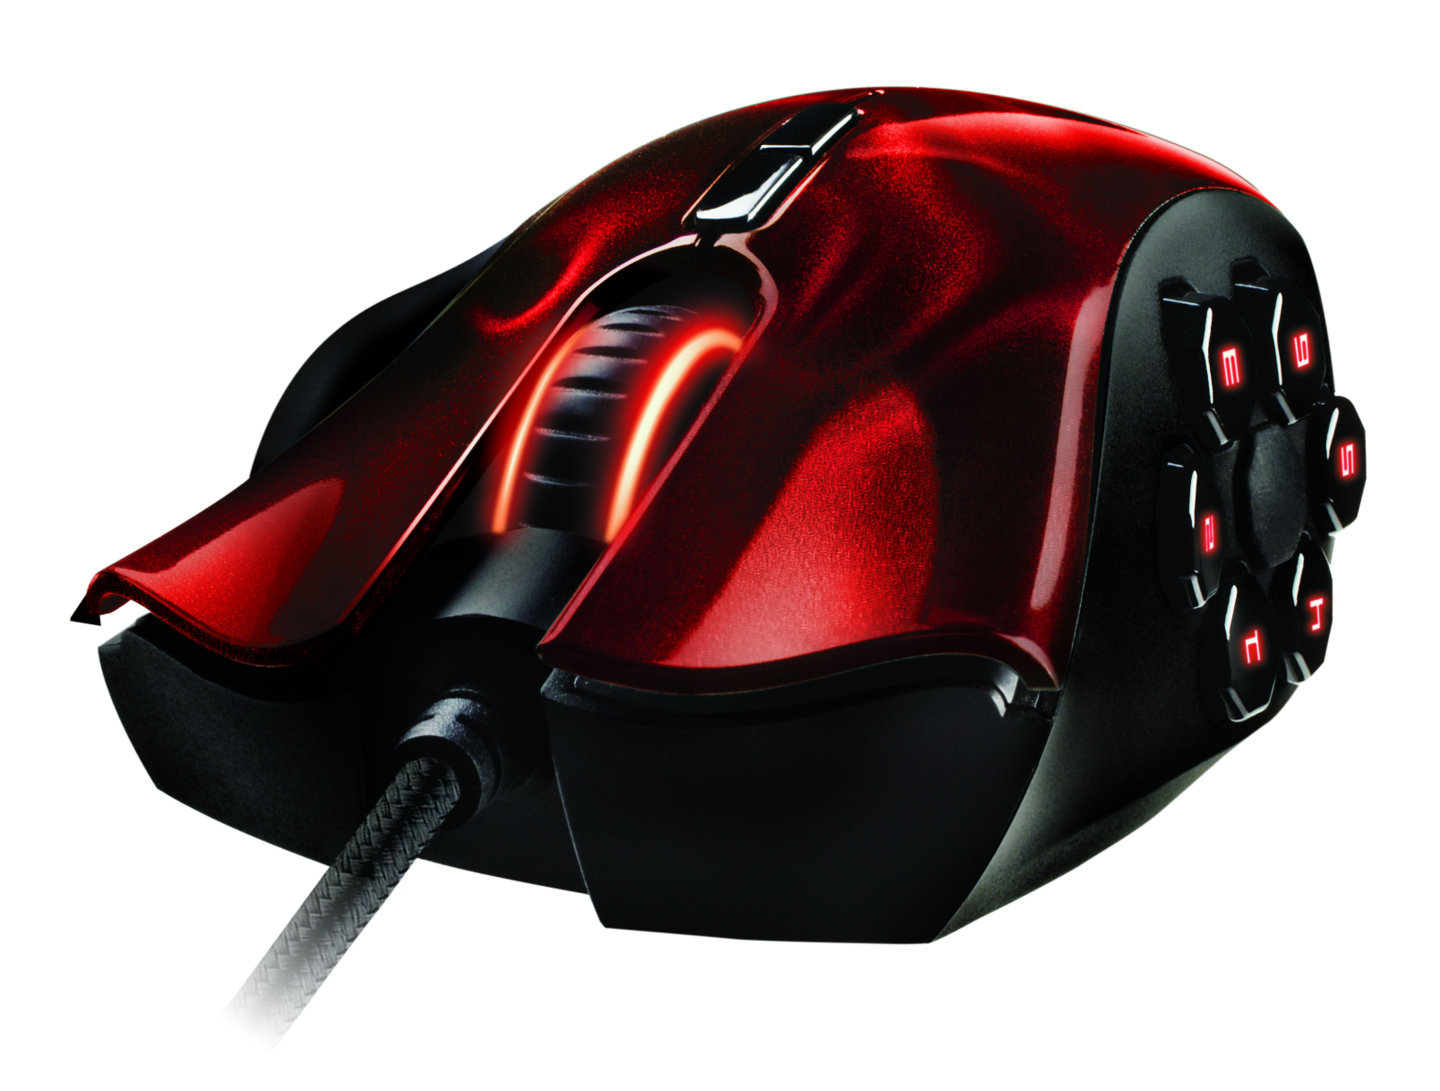 Razer Introduces the Naga Hex Wrath Red Edition Gaming Mouse